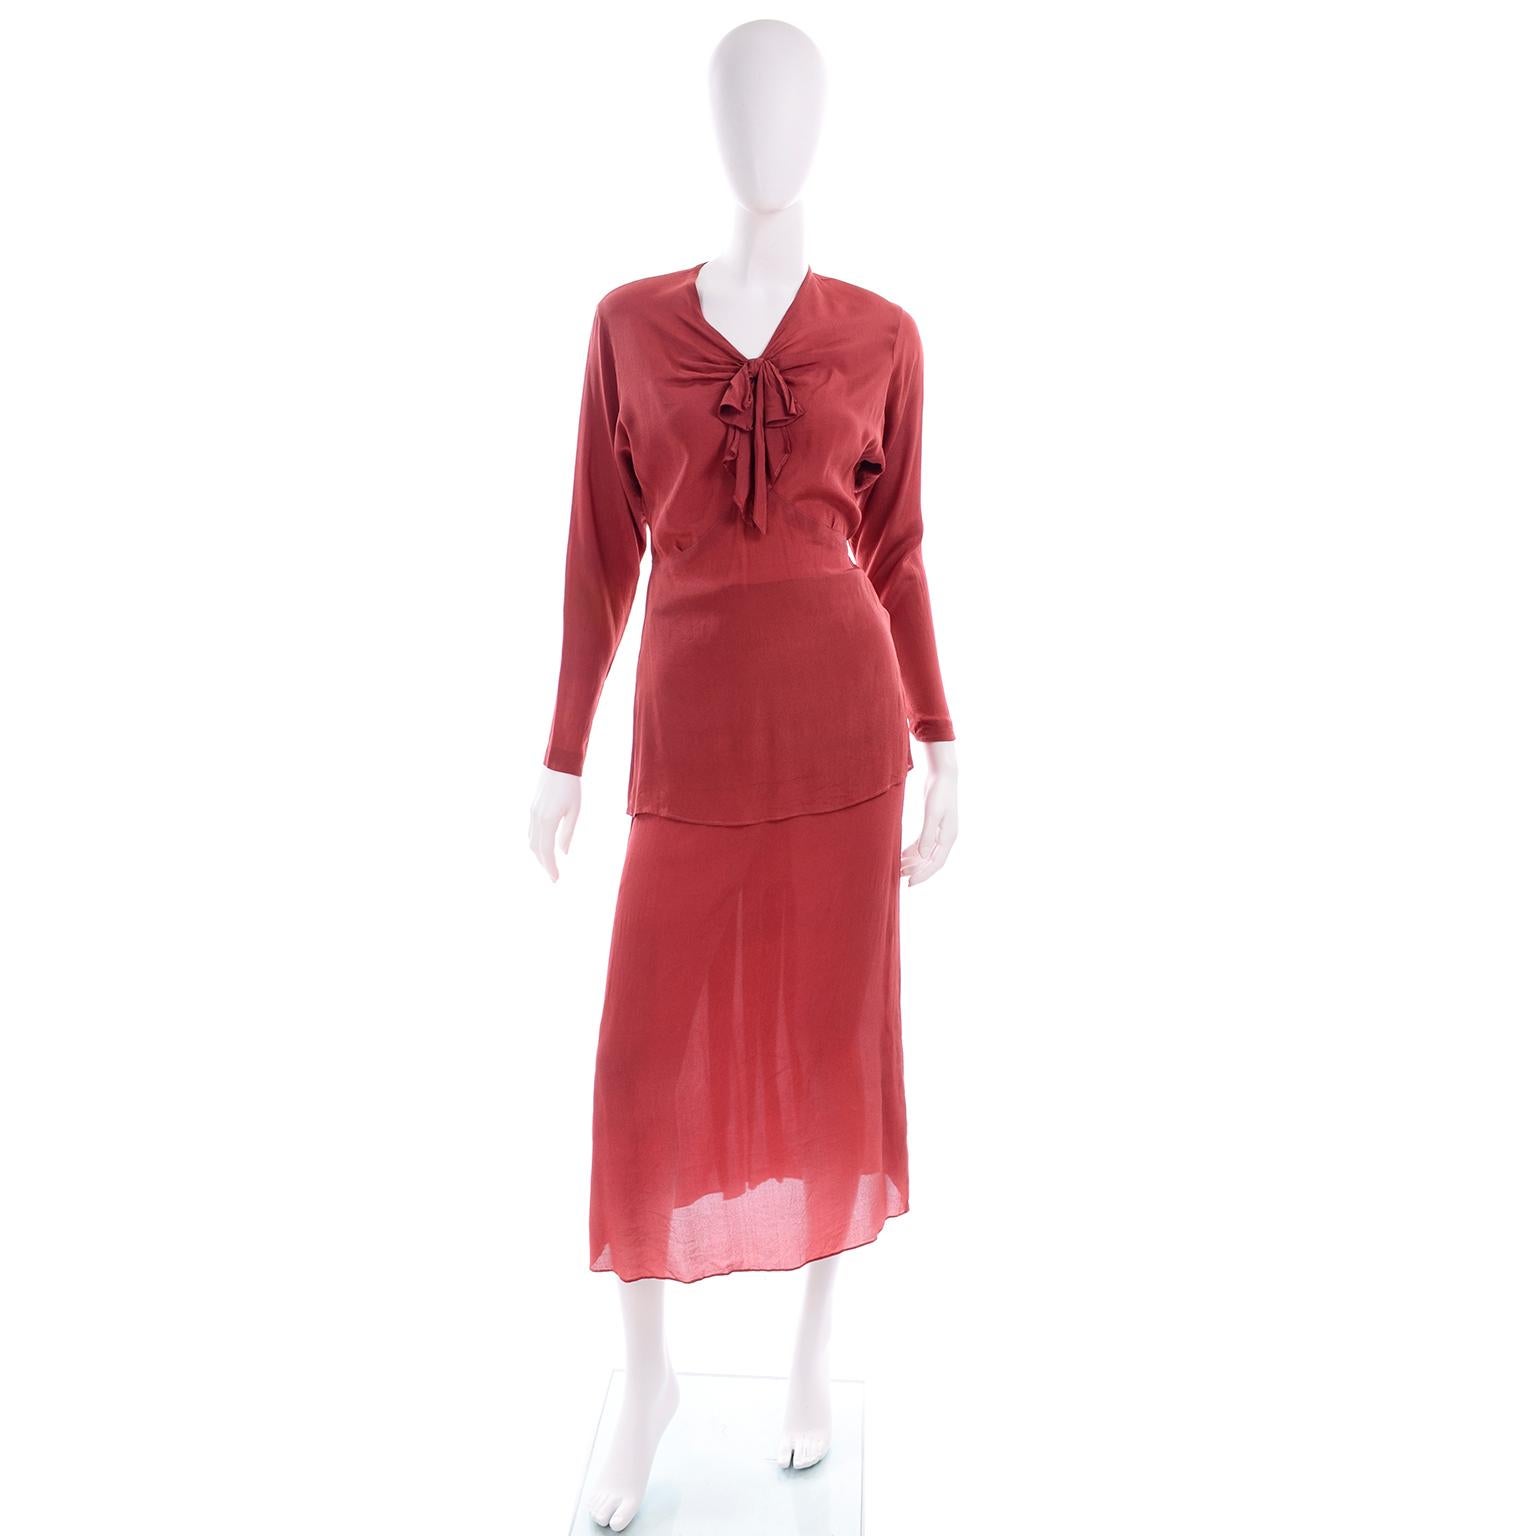 Women's 1930s Rusty Red Silk Vintage 2 Pc Bias Dress With Rhinestone Belt and Tie For Sale